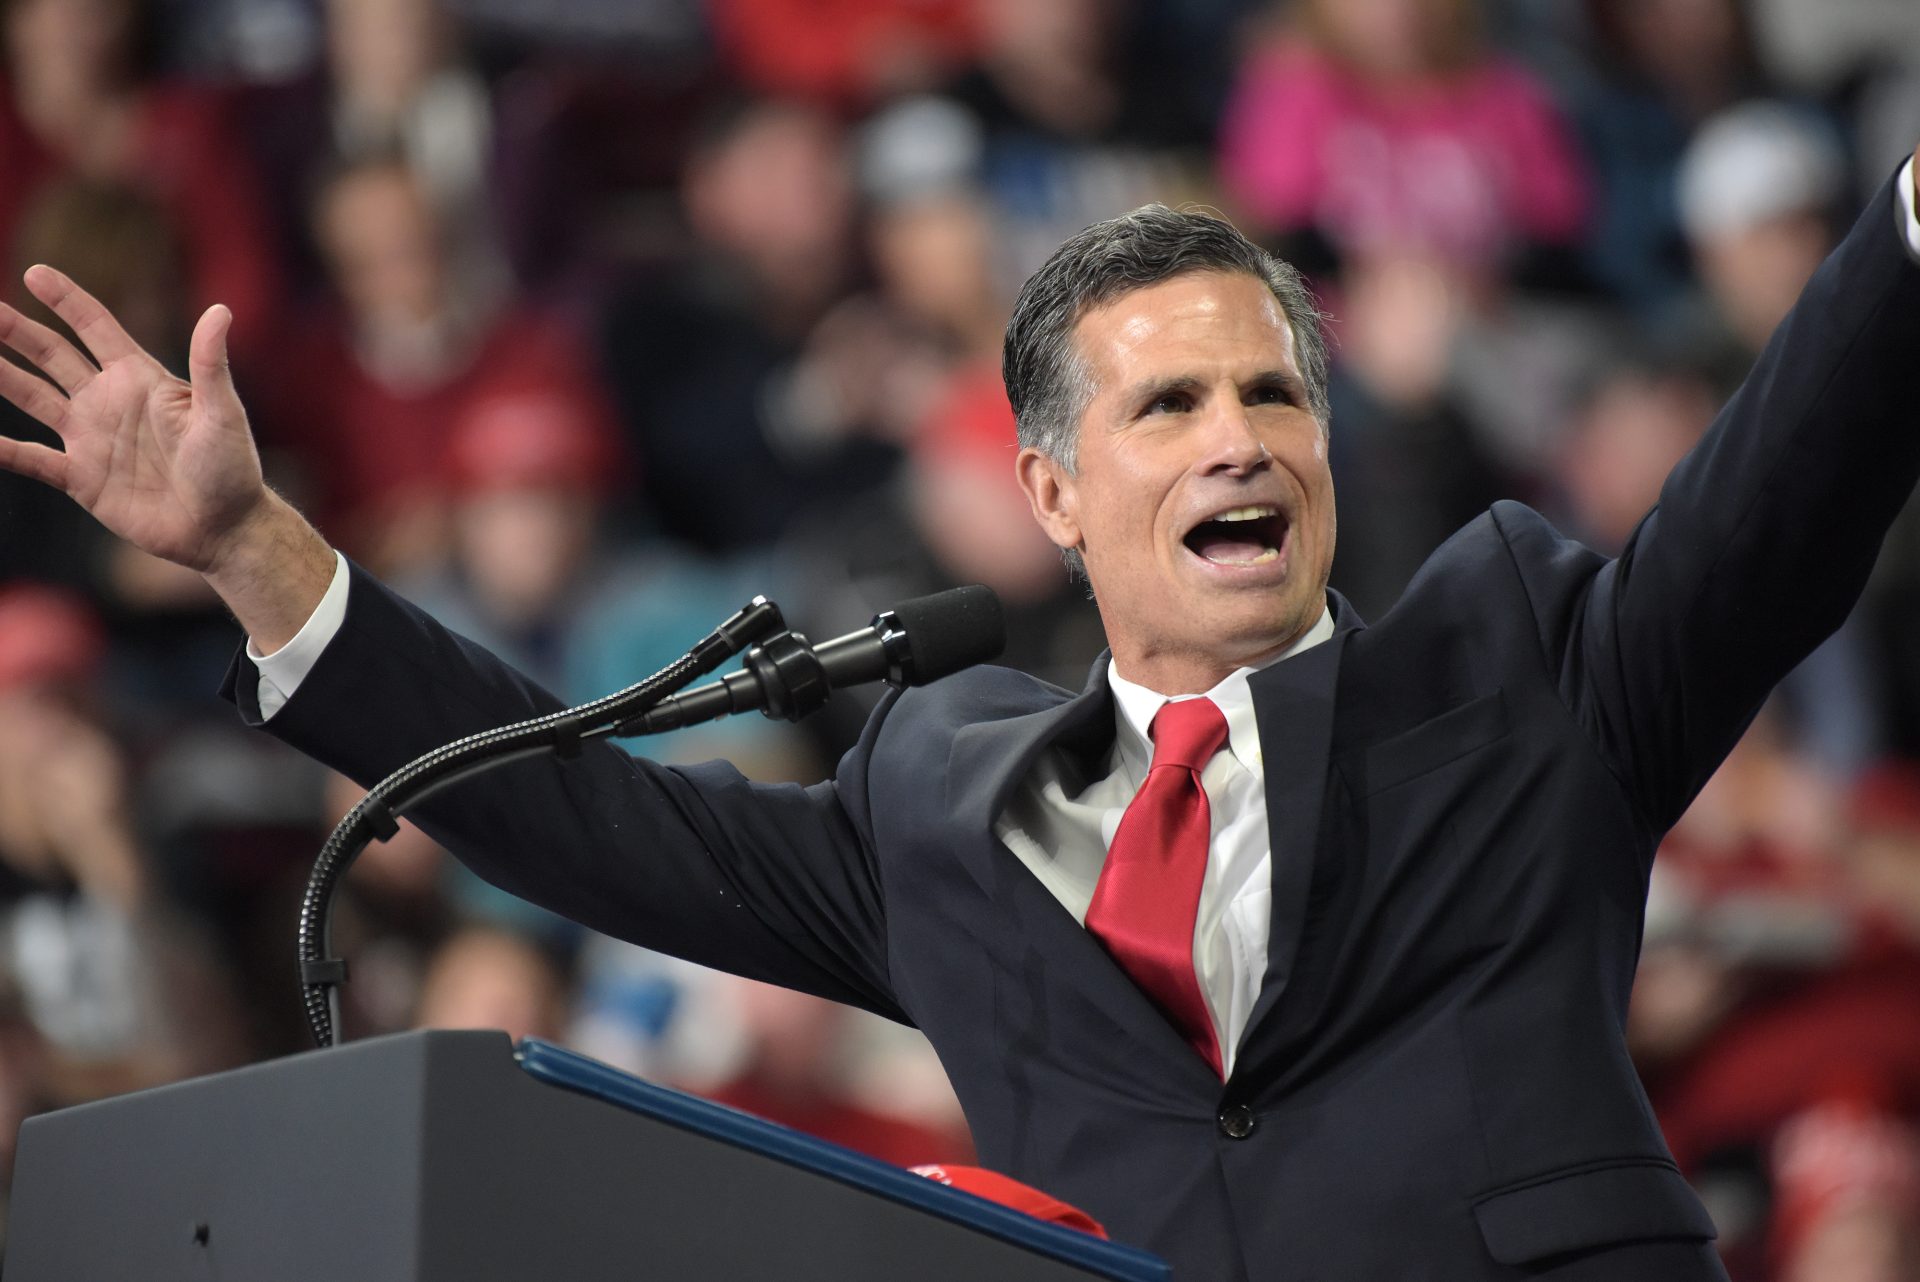 FILE PHOTO: U.S Representative in Pennsylvania's 9th congressional district Dan Meuser speaks during a 2020 campaign rally Dec. 10, 2019, at the Giant Center in Hershey, Pennsylvania.